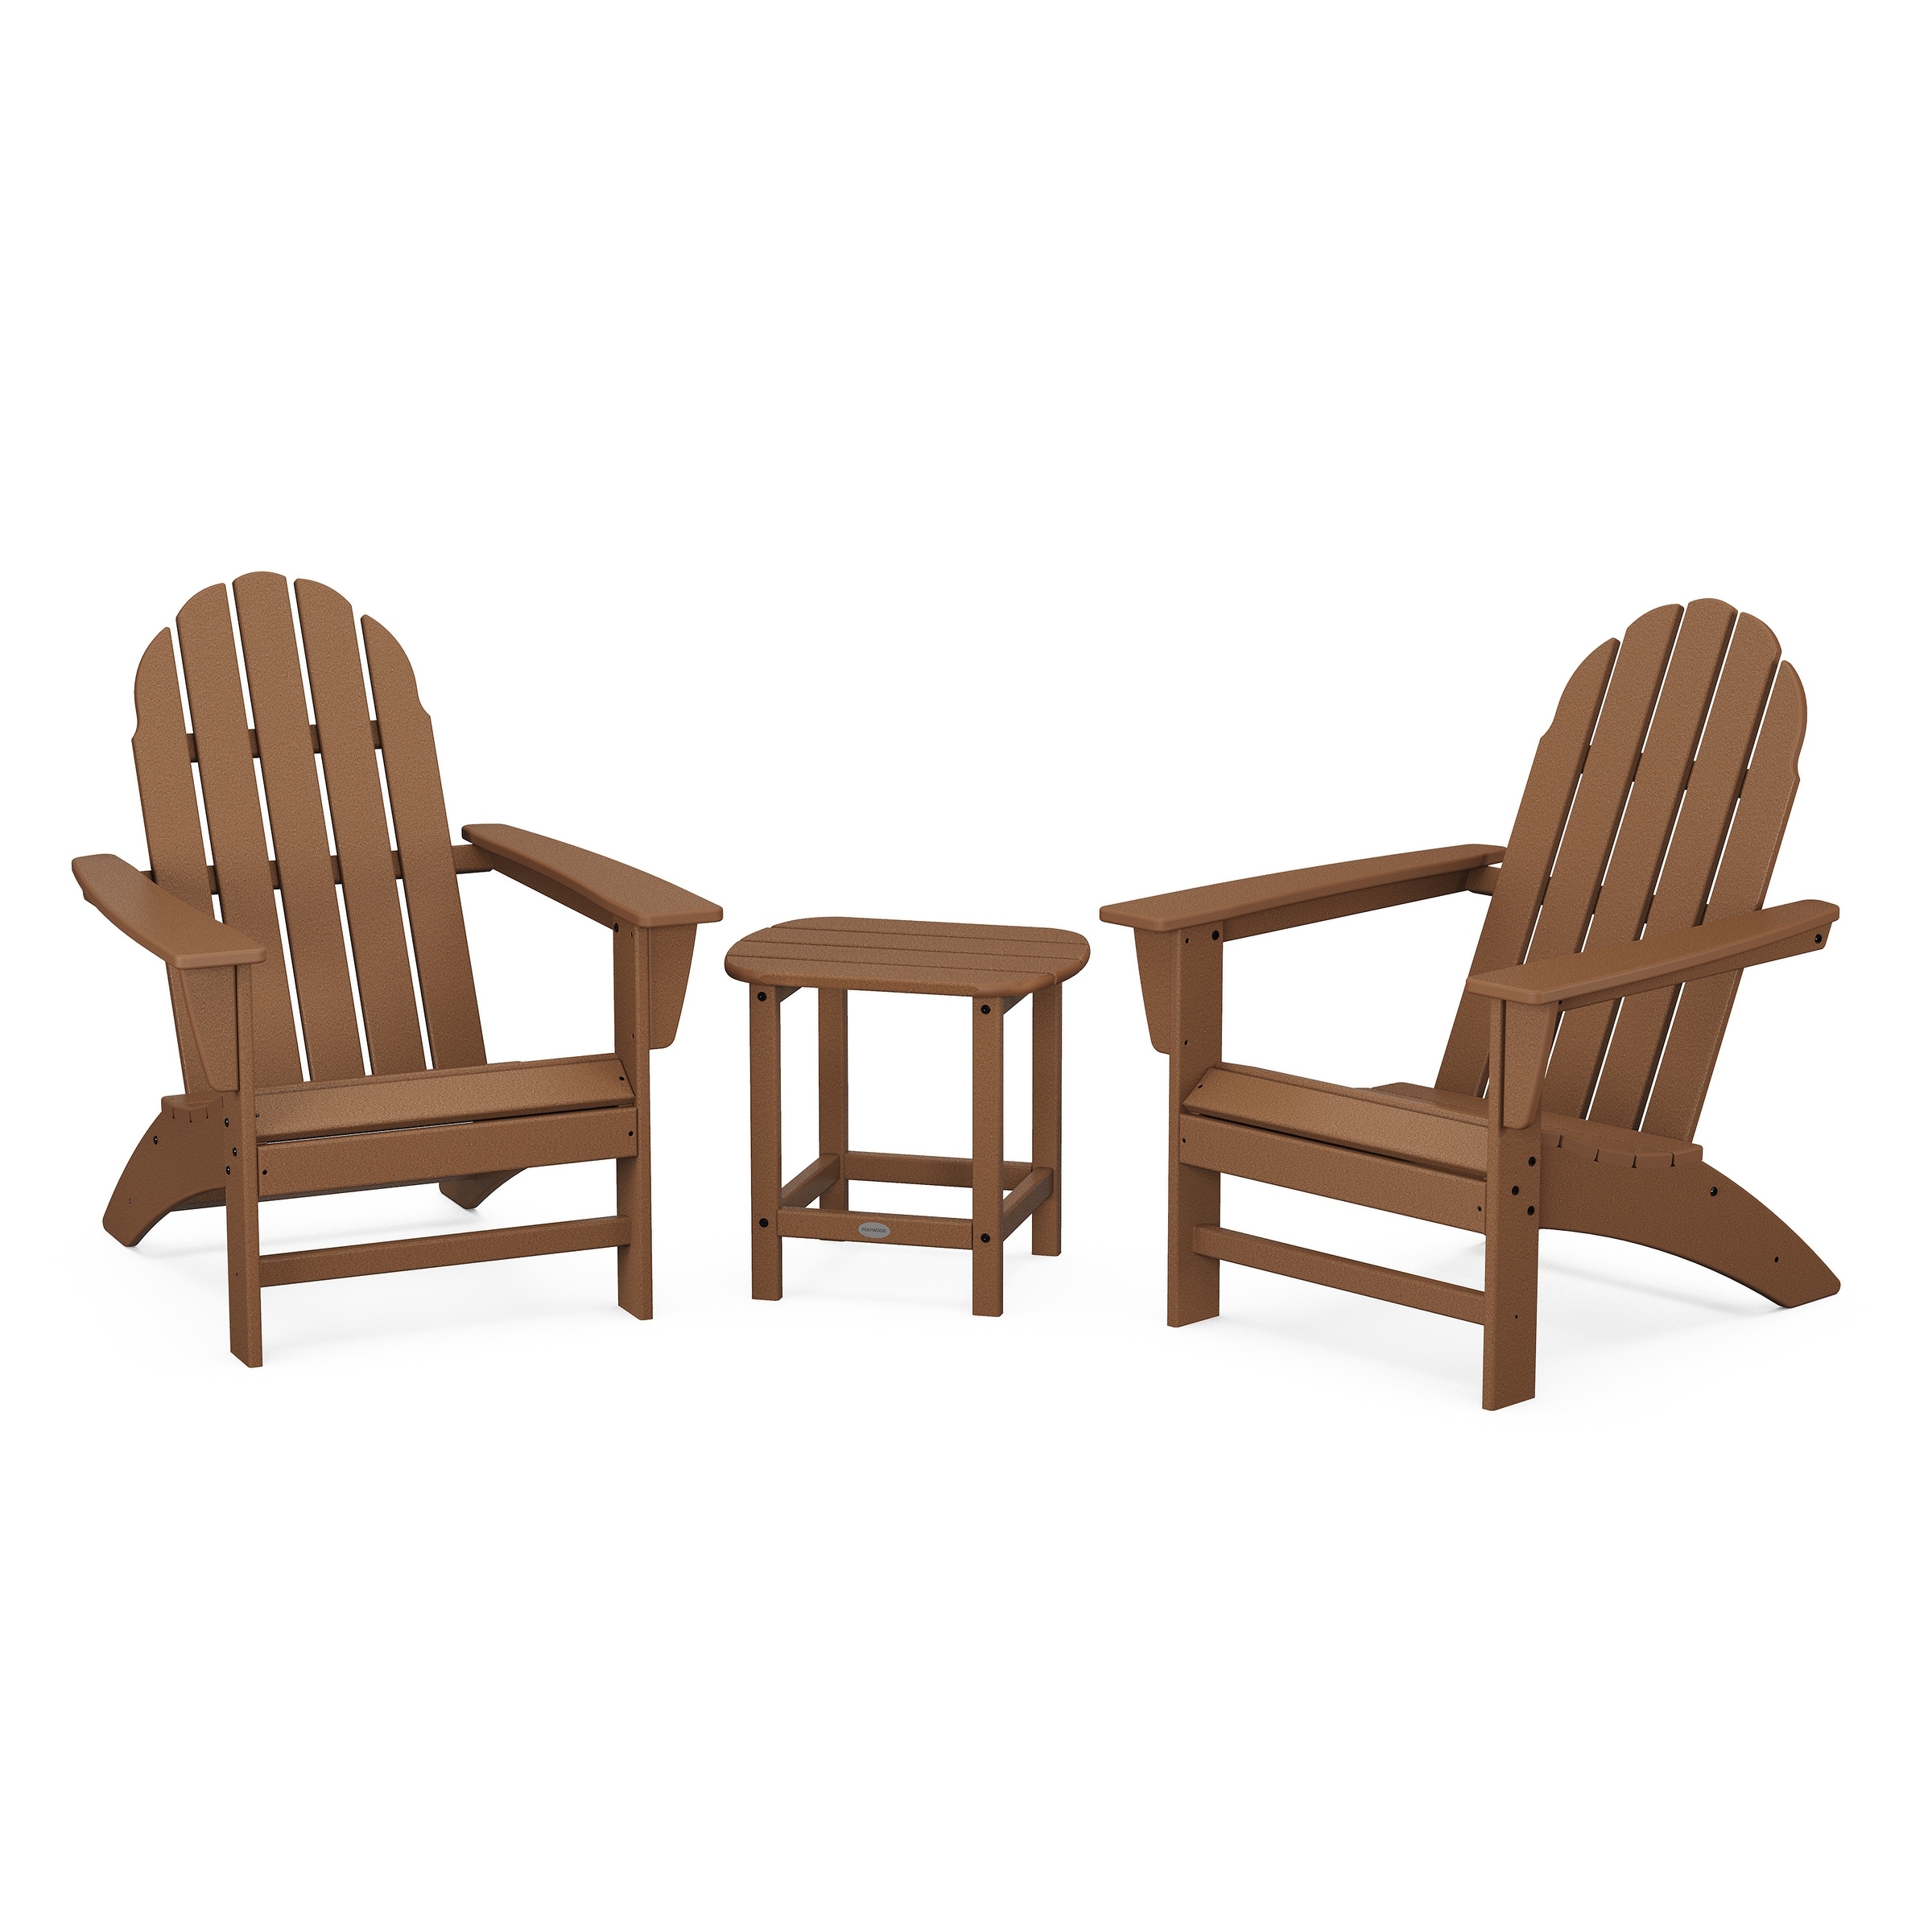 Polywood Vineyard 3-piece Adirondack Set With South Beach 18-inch Side Table